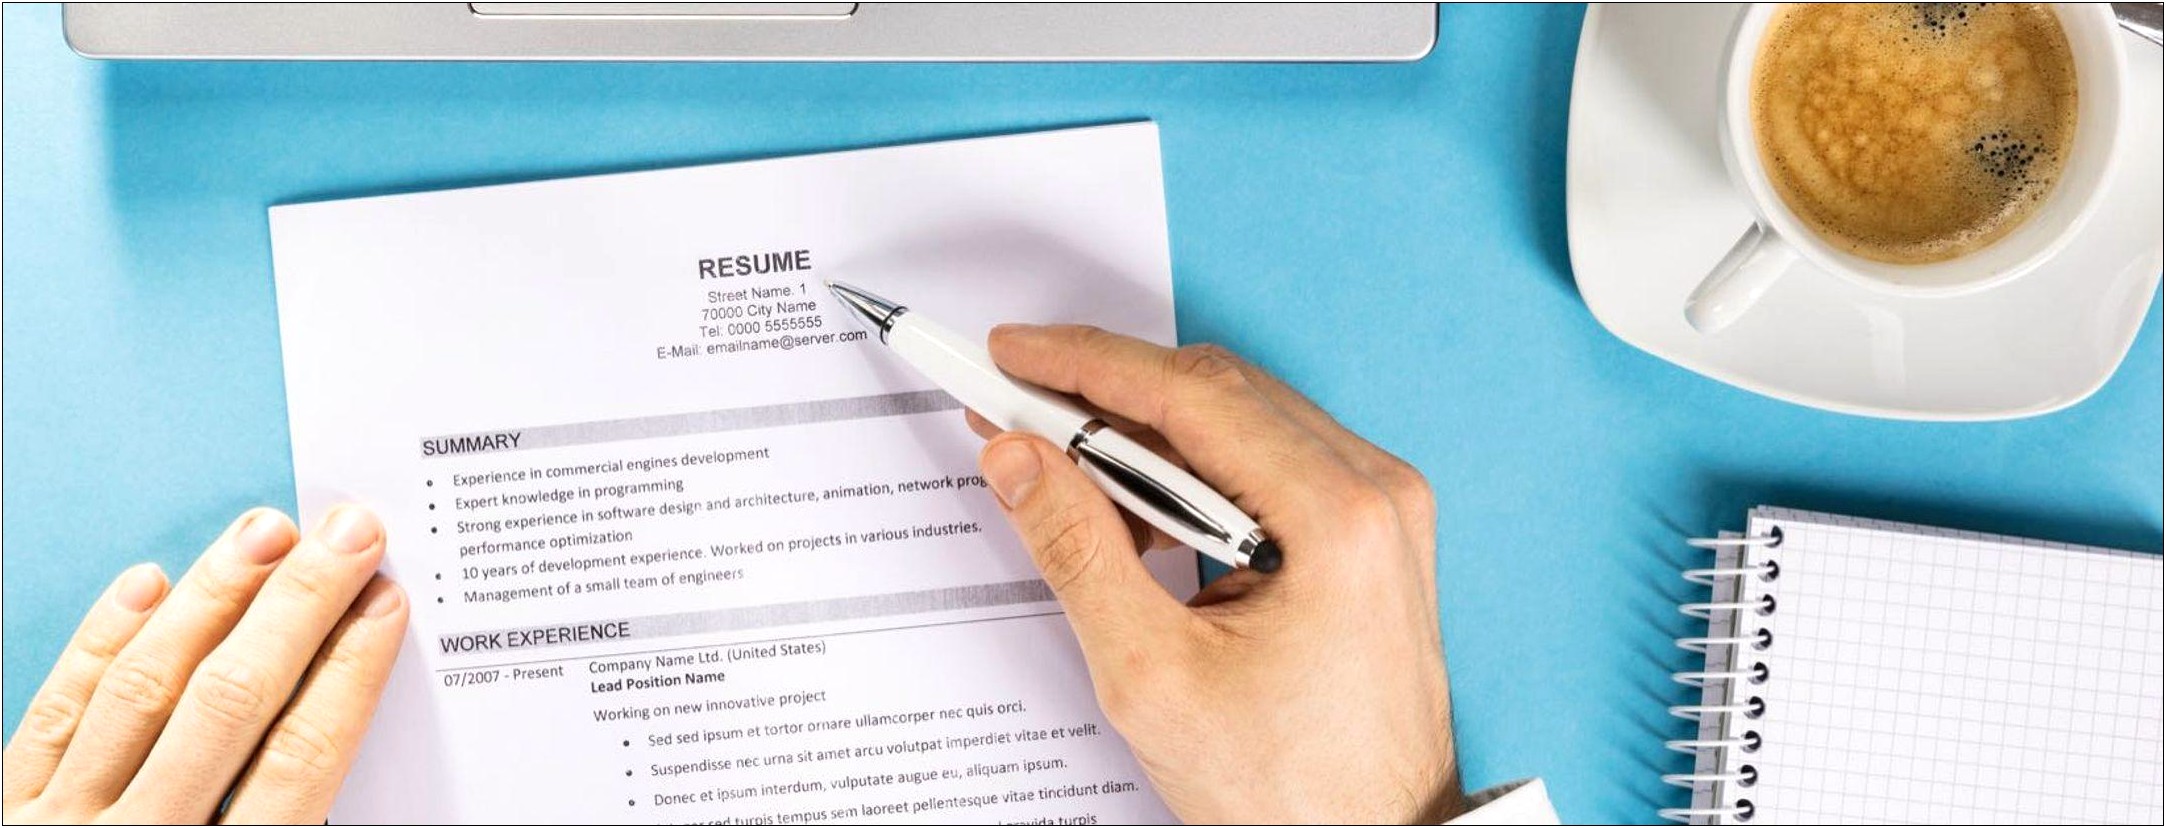 Is It Good To Staple Your Resume